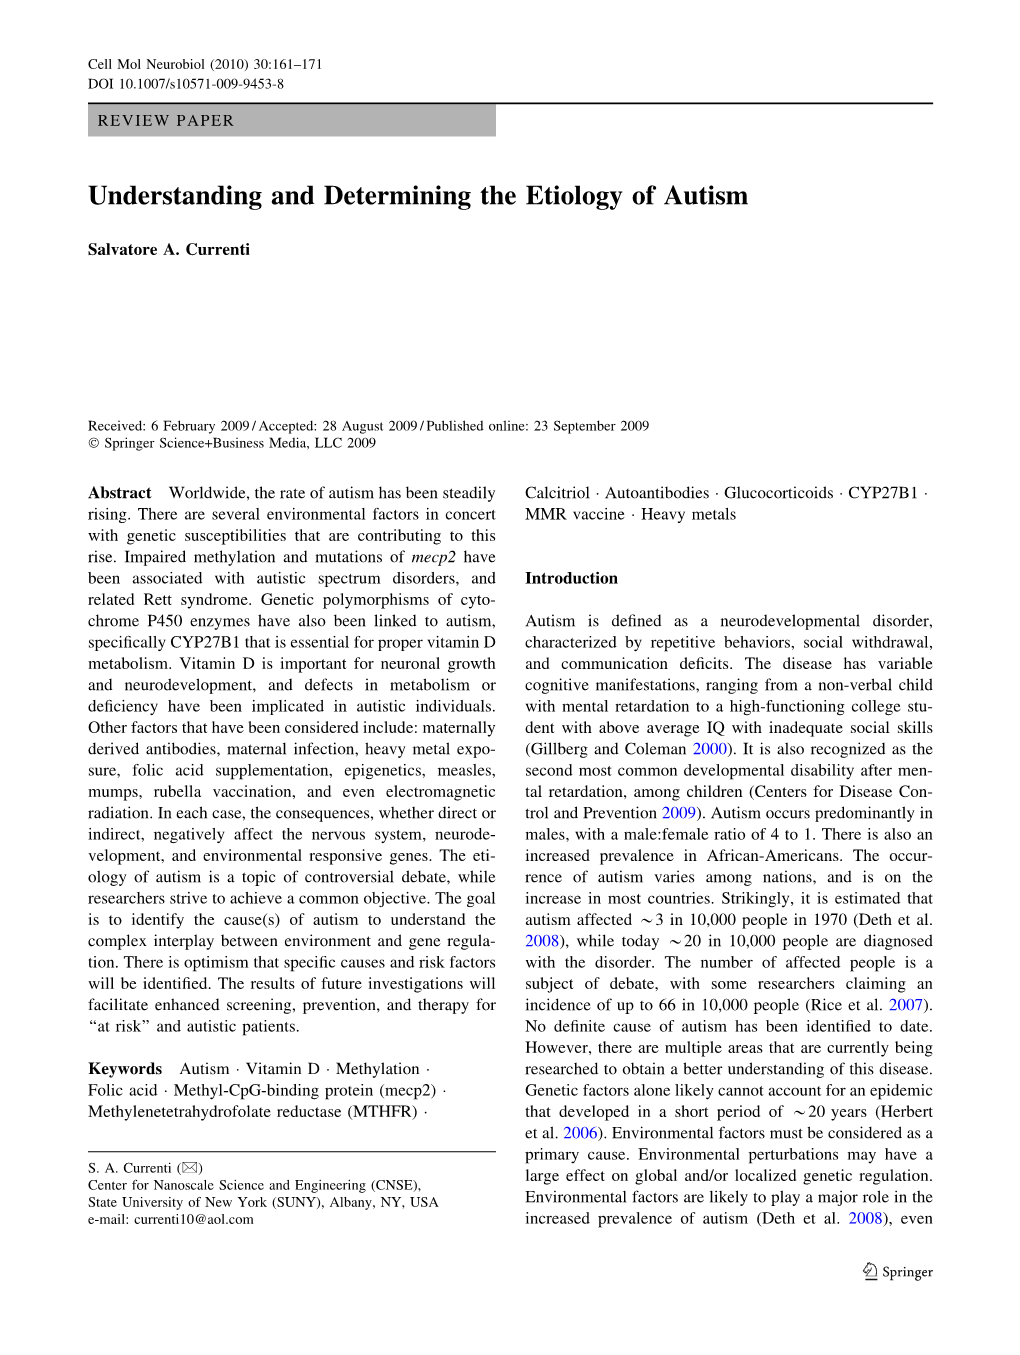 Understanding and Determining the Etiology of Autism